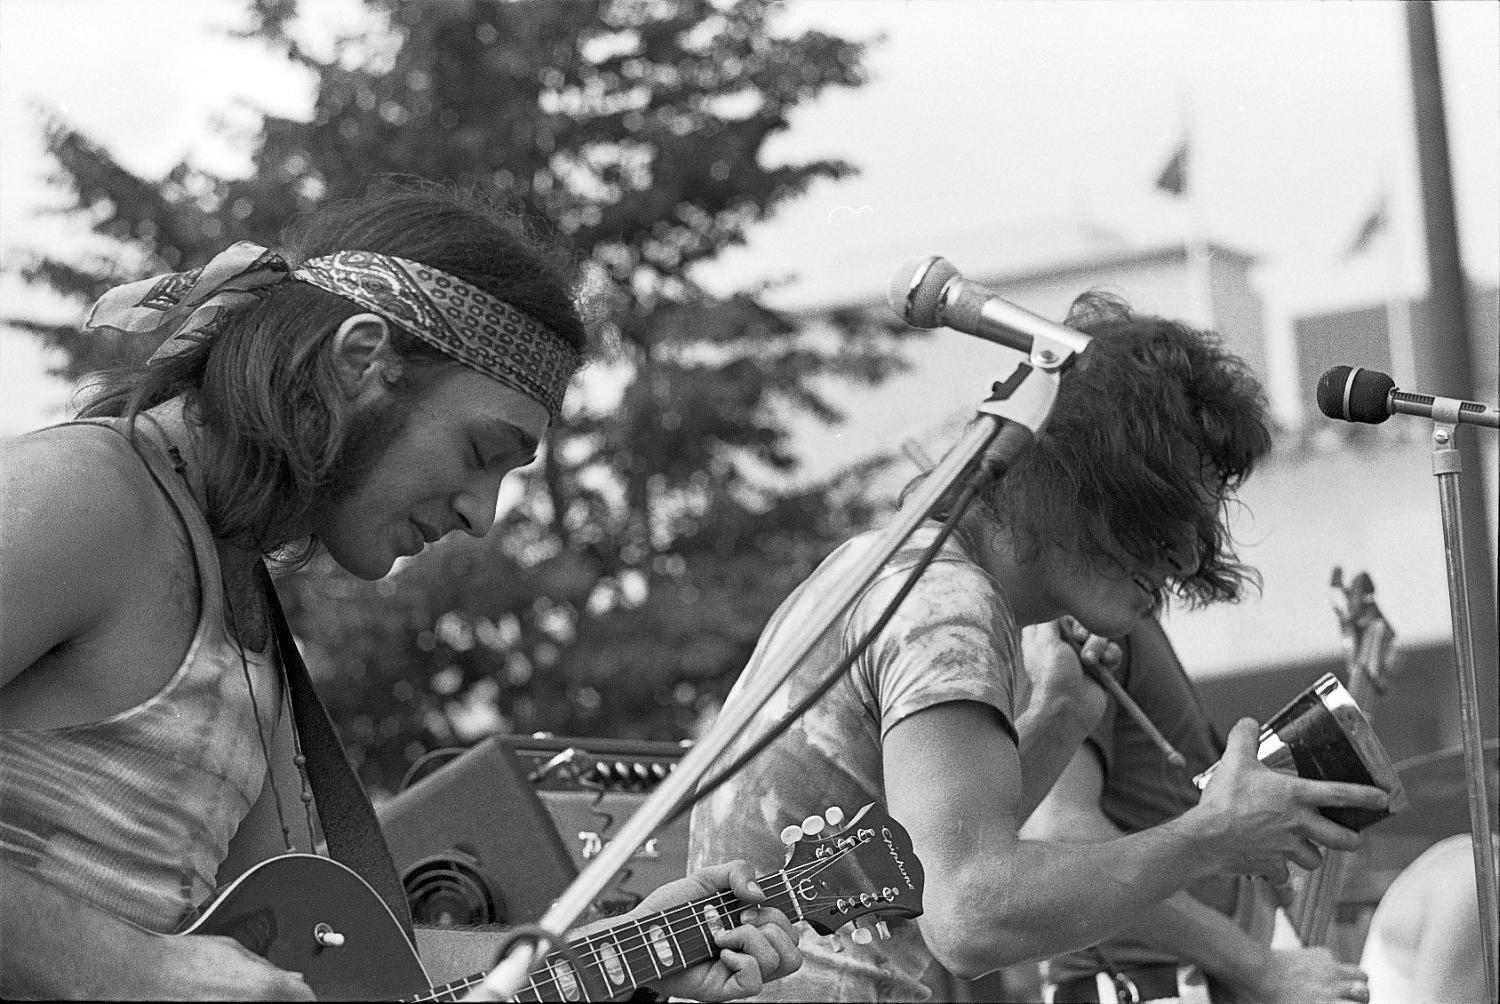 Mudflat, warm-up for Lighthouse Concert at City Hall, Toronto, 1970: Pinky Dauvin & David Moulaison.